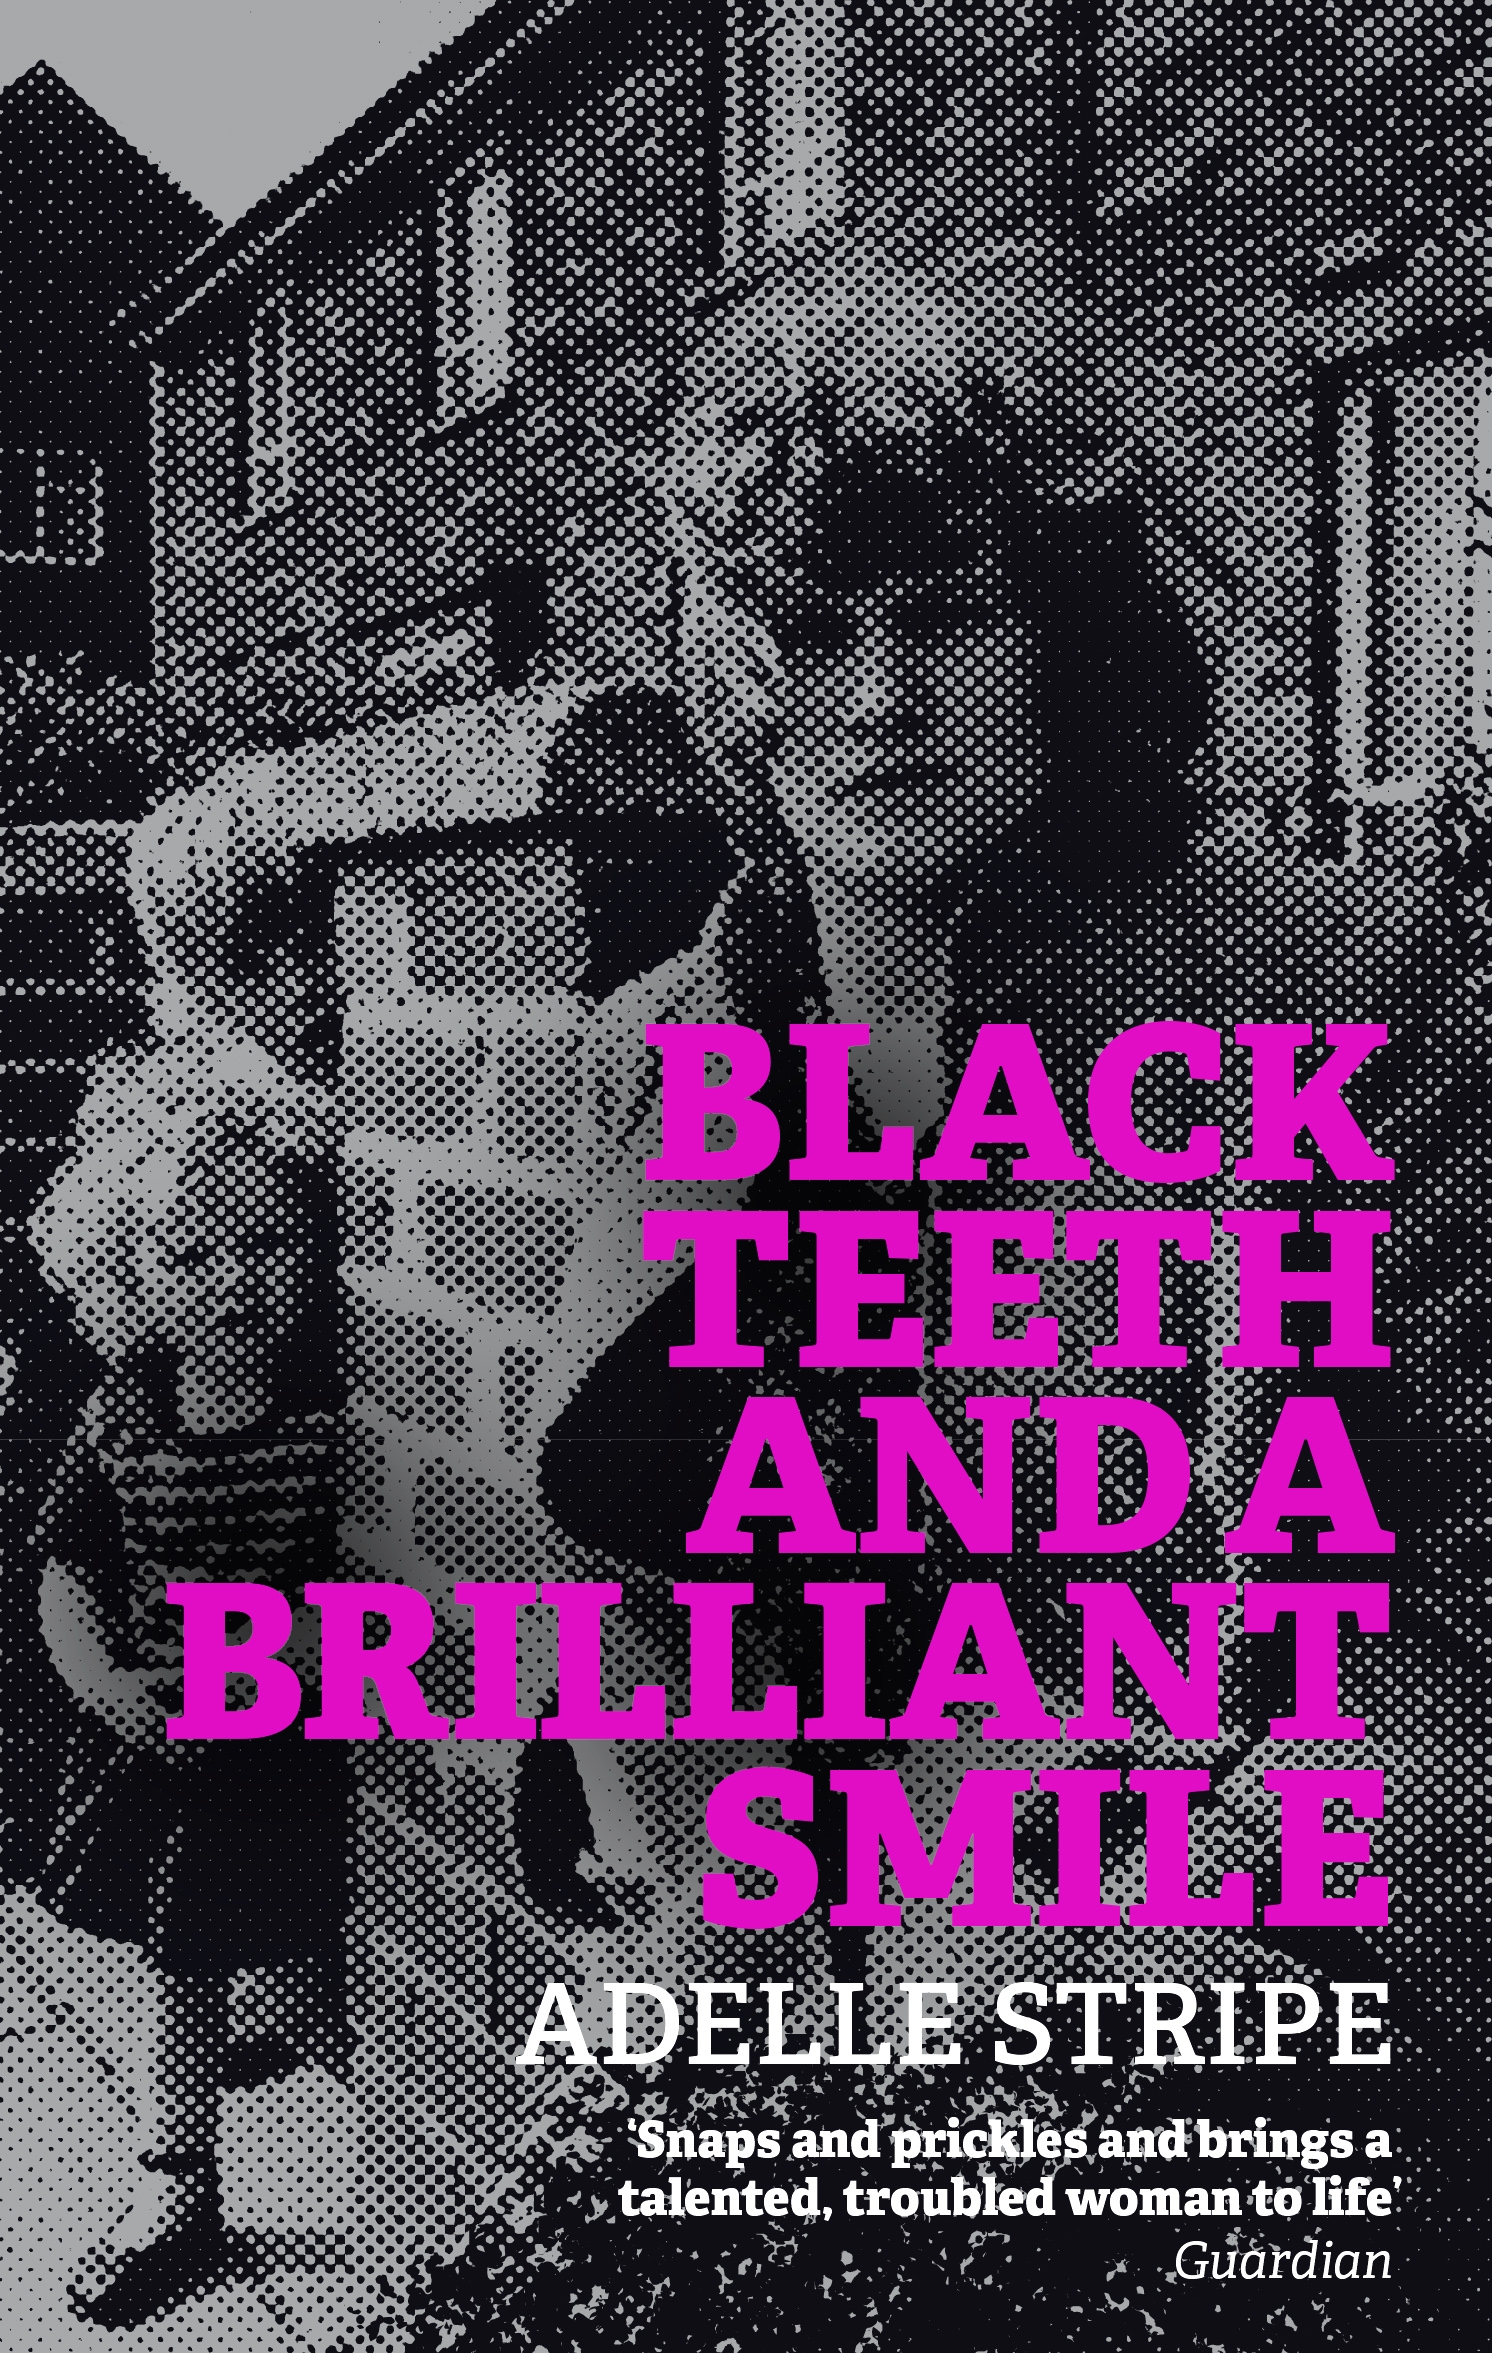 Black Teeth And A Brilliant Smile by Adelle Stripe is on the shortlist